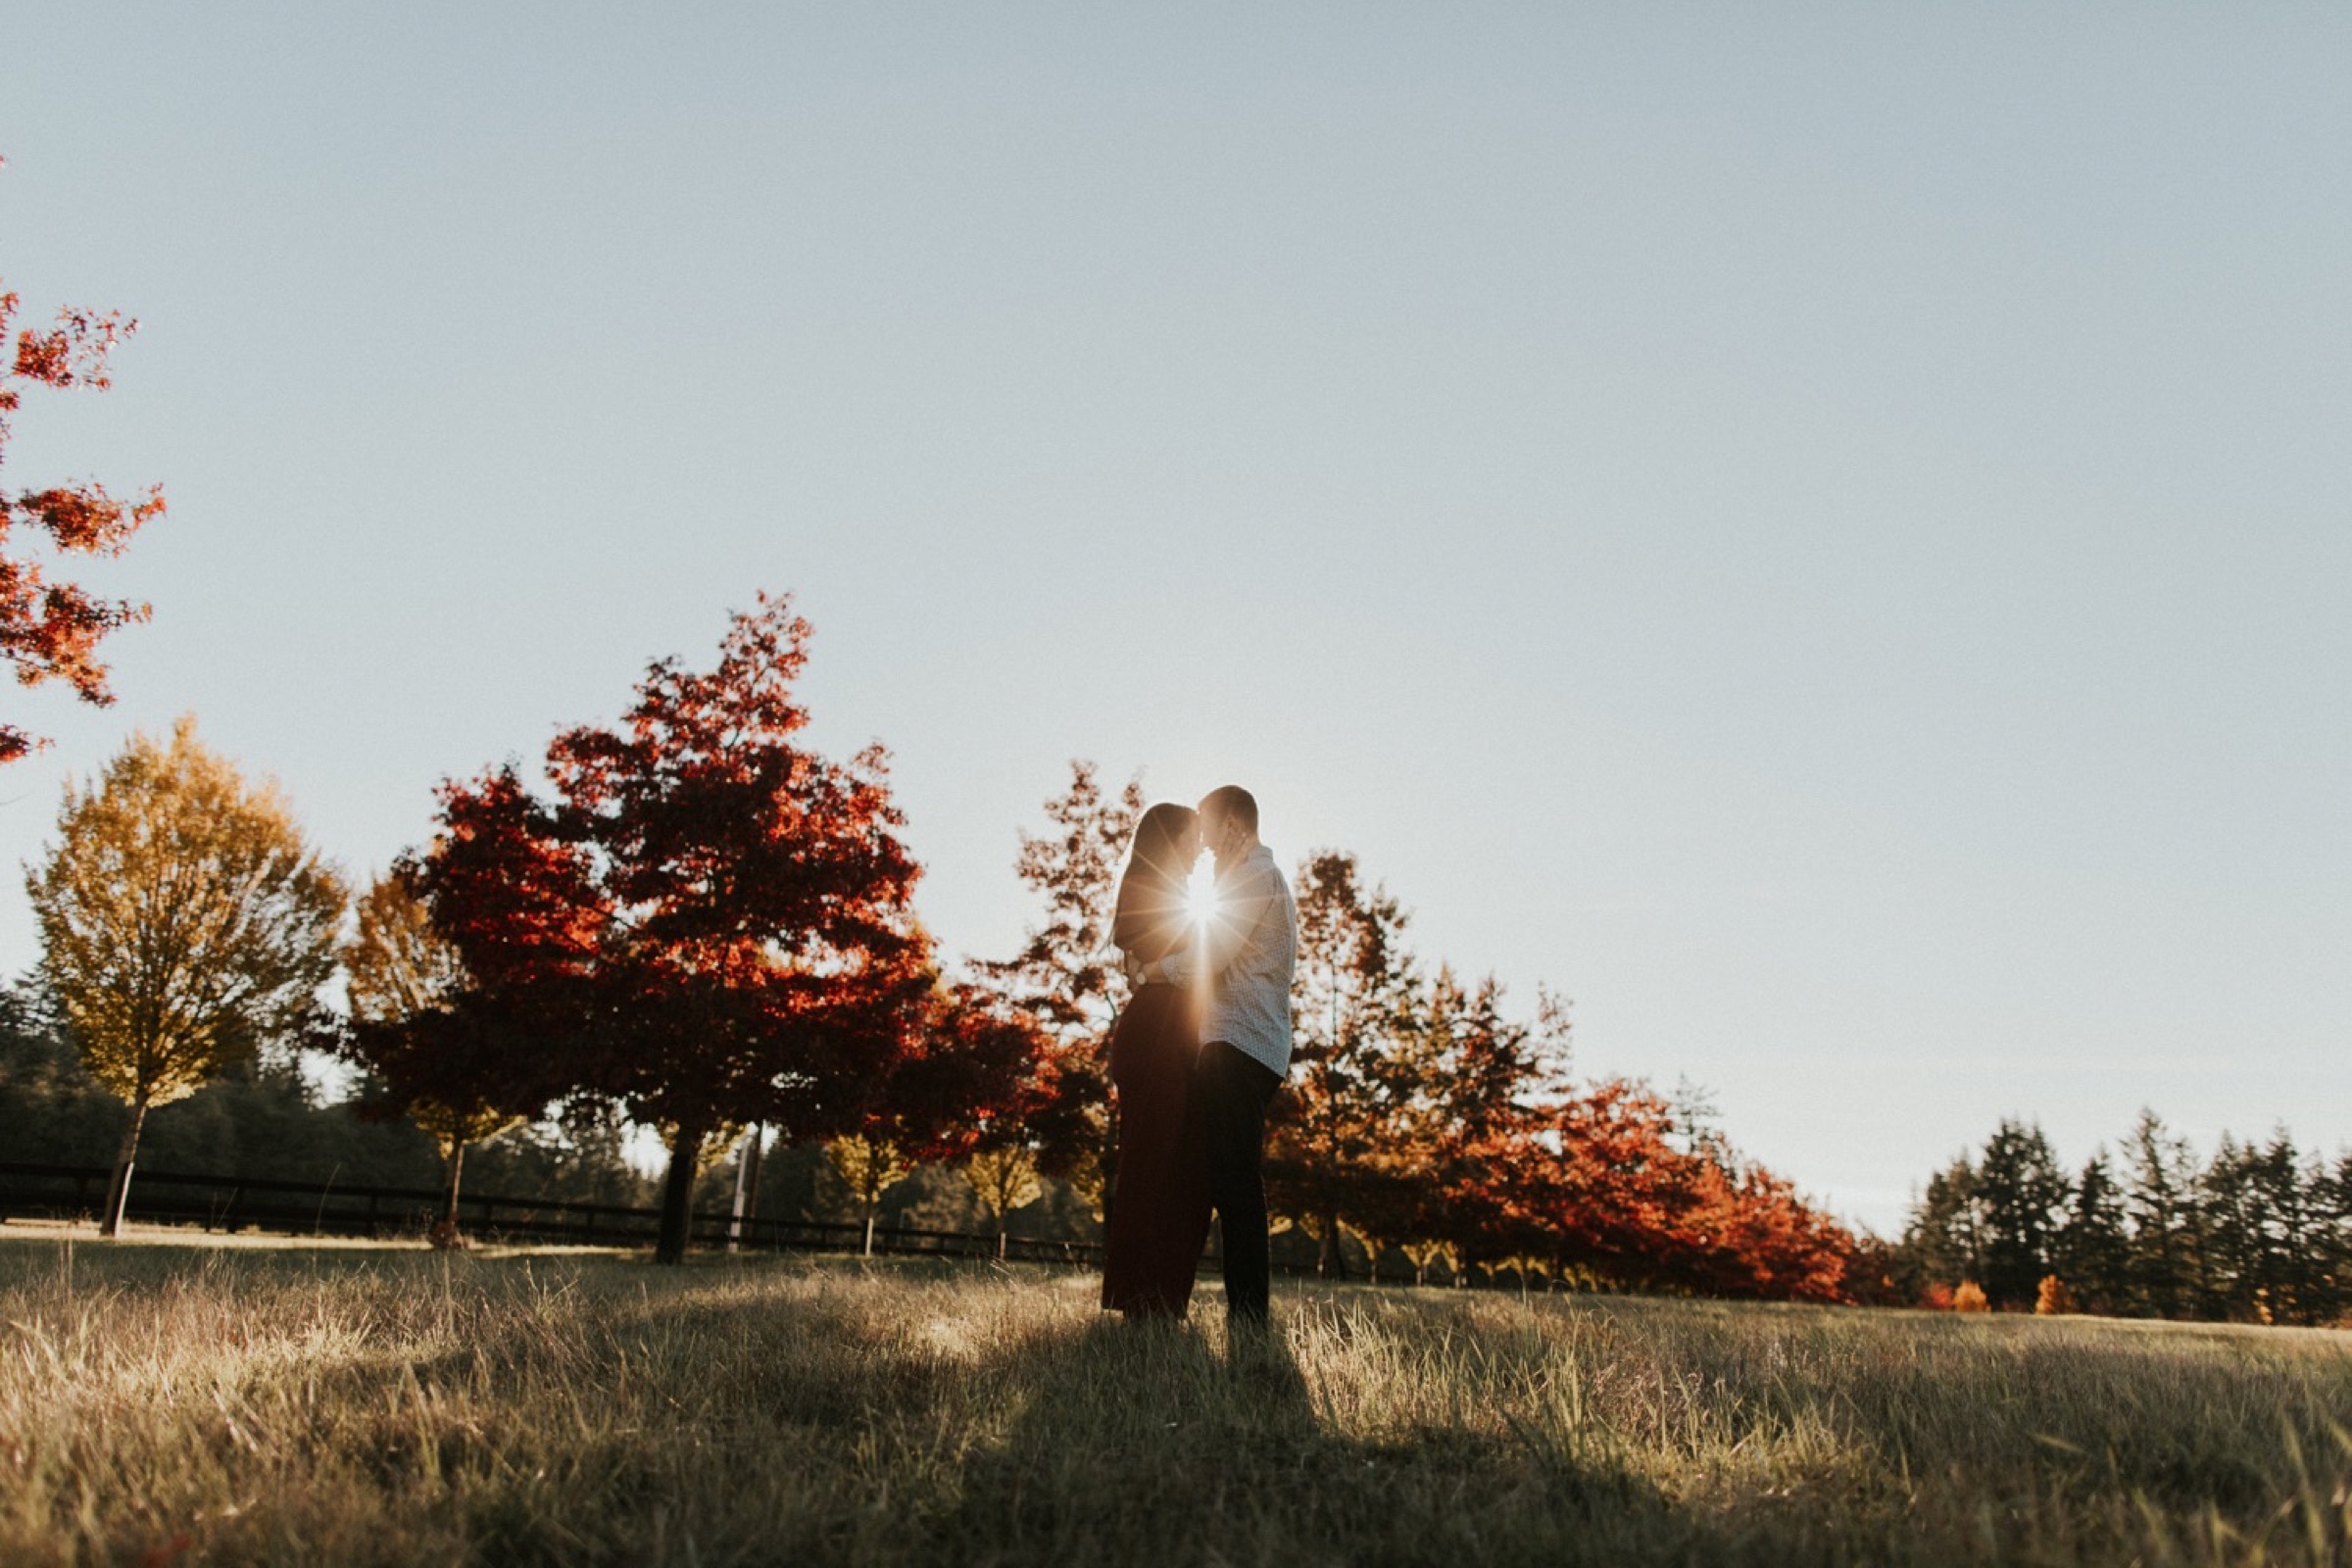 Vashon Island Engagement Session by Sarah Anne Photography